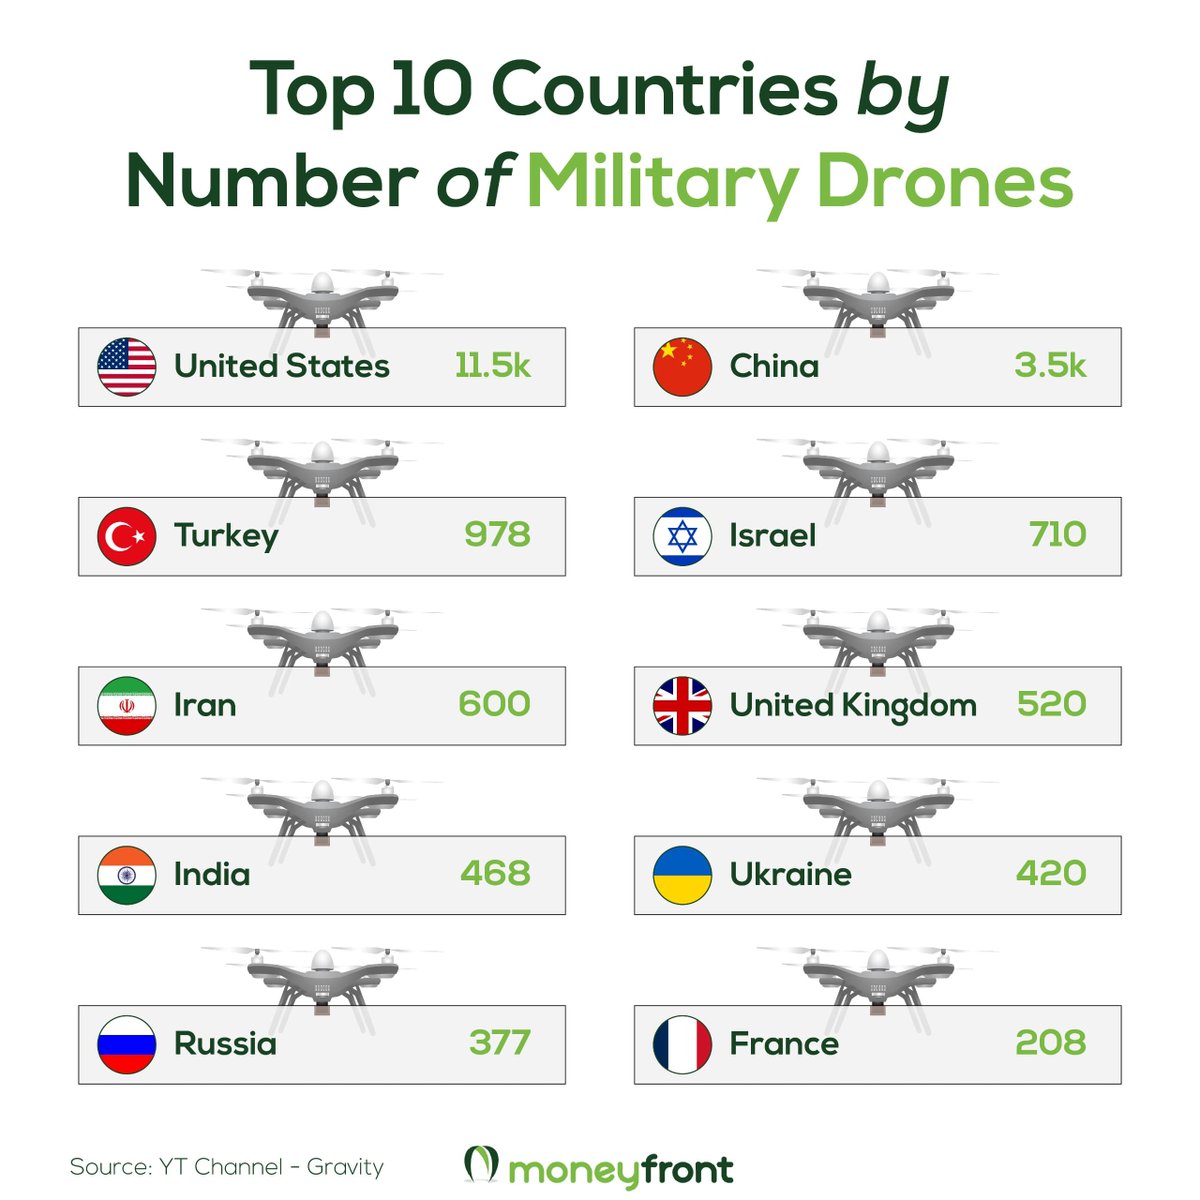 Get ready for a sky-high look at the 10 countries dominating the military drone game!

These unmanned aerial vehicles (UAVs) are changing warfare, so let's have a look.

#MilitaryDrones #UAVs #DefenseTechnology #GlobalSecurity #FutureWarfare #Aviation #GlobalPowers #defense